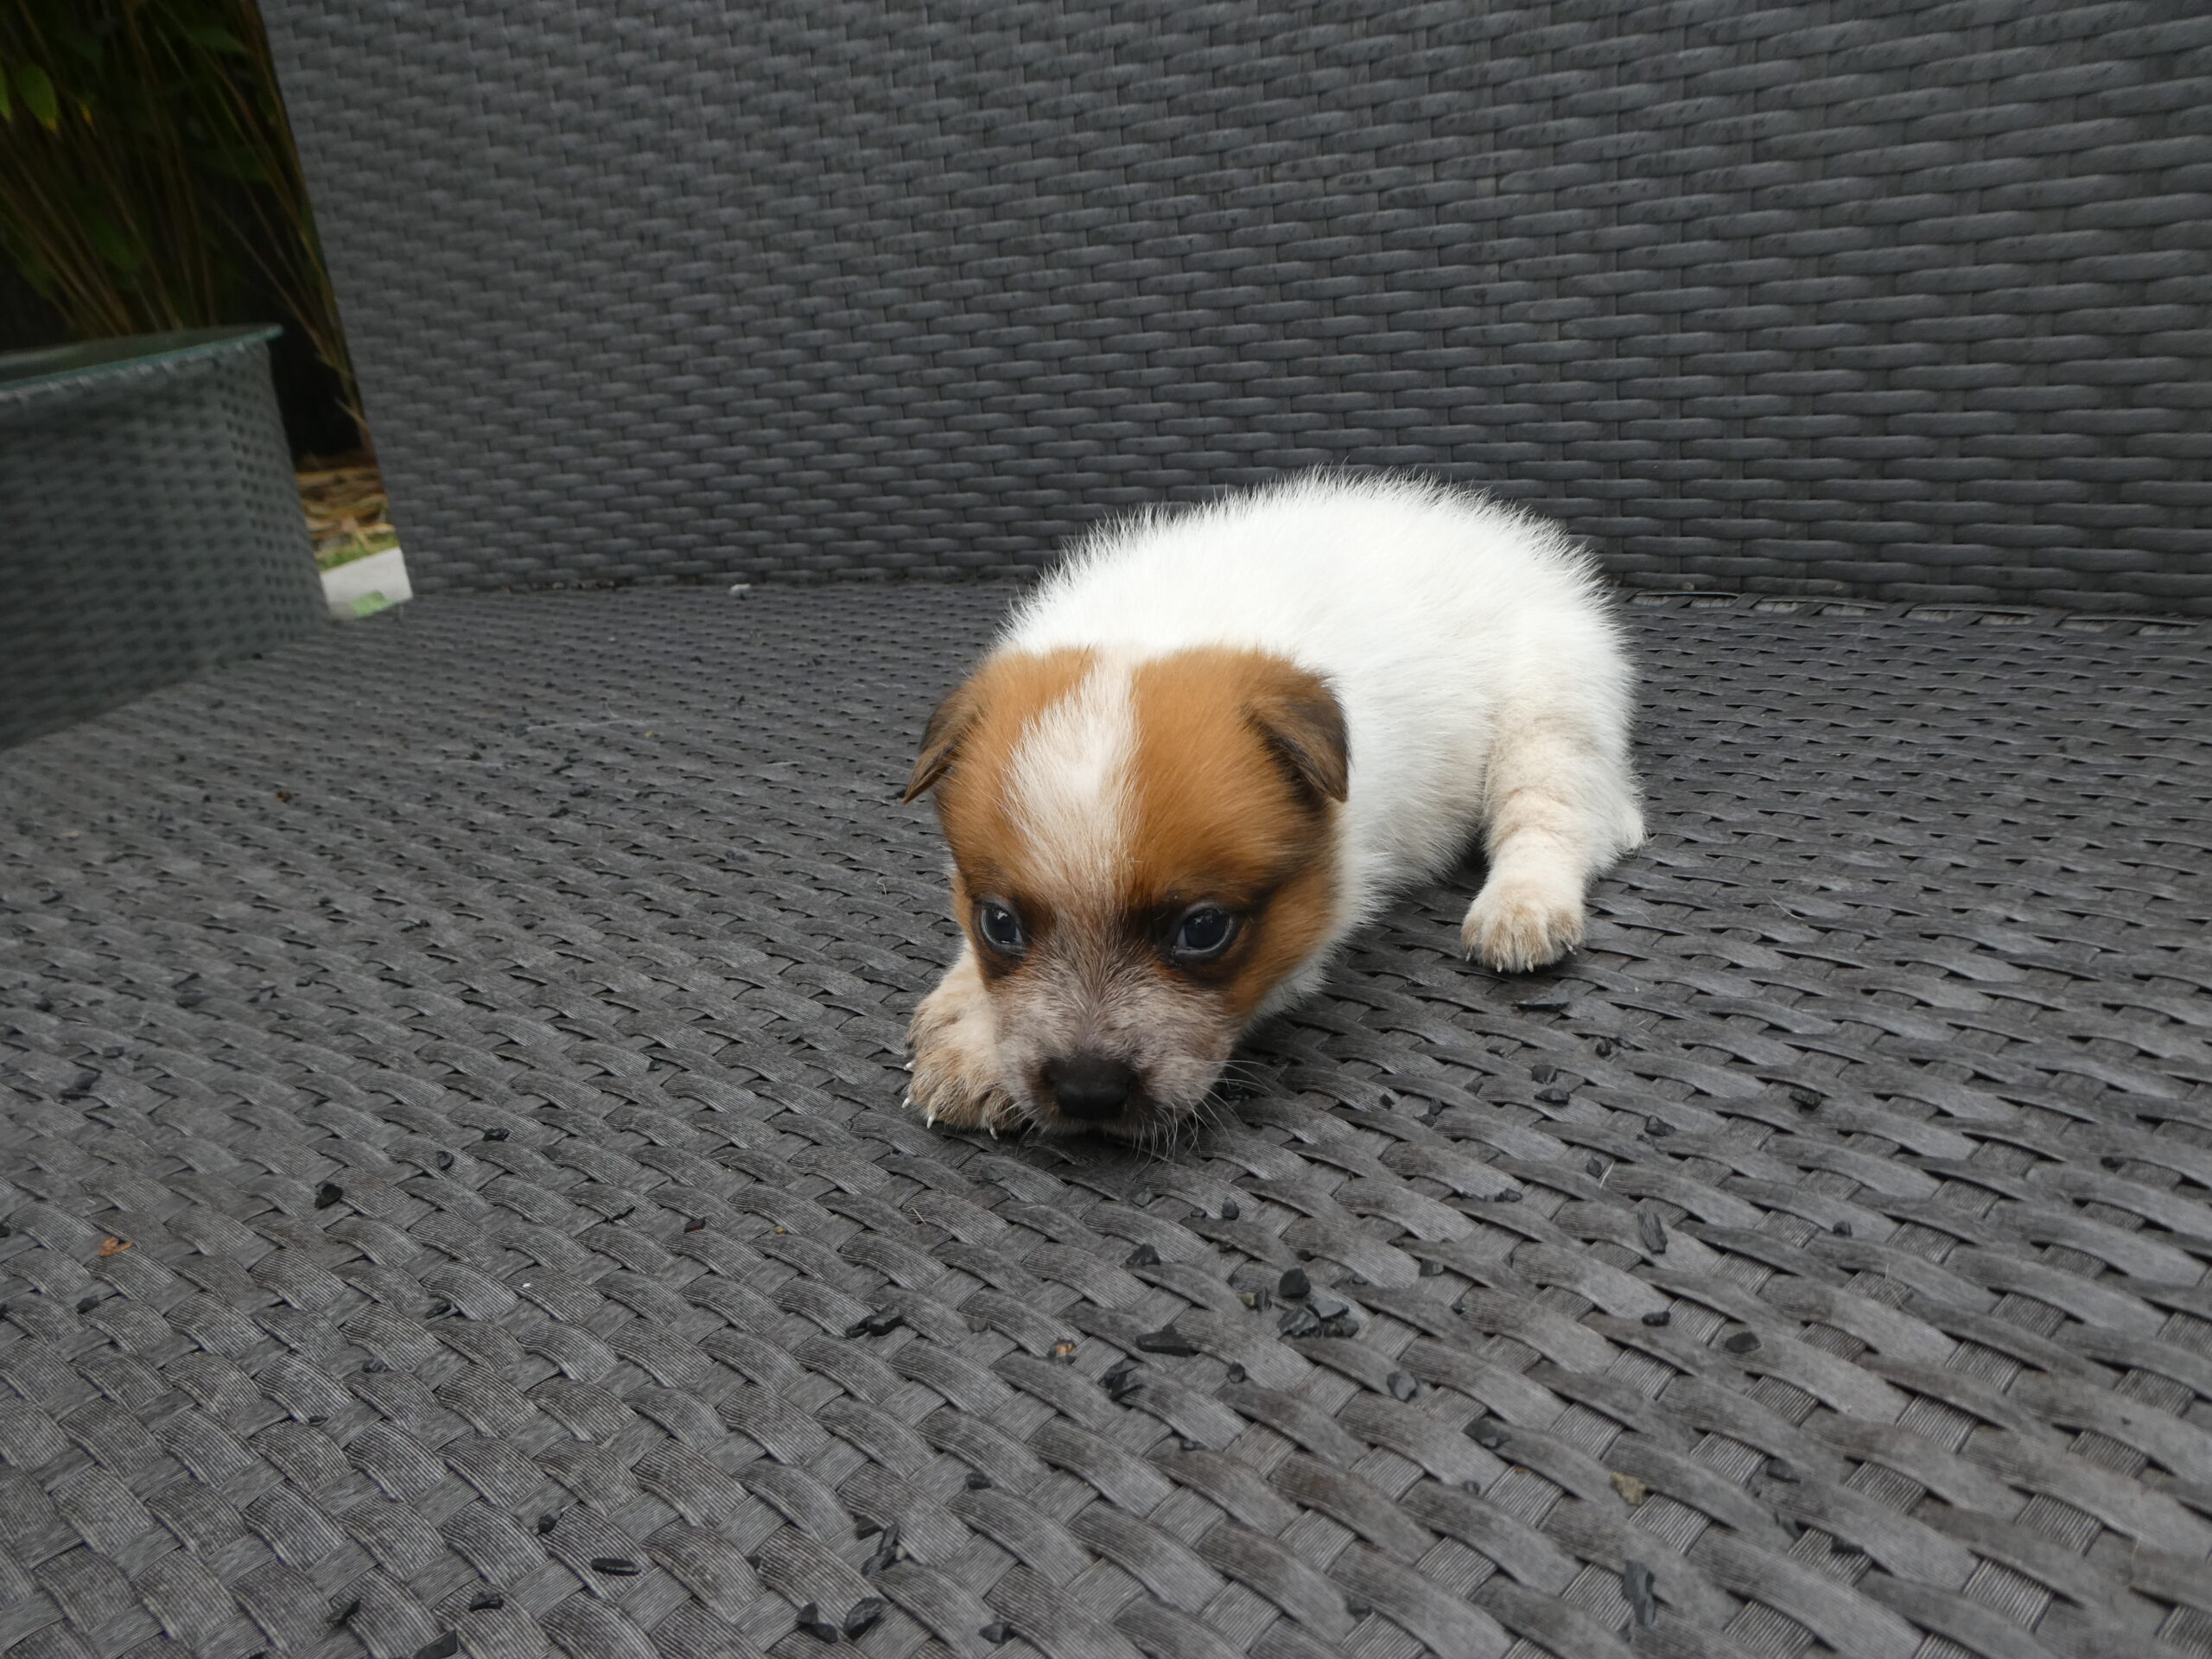 Purebred Australian Cattle dog puppies for sale Bundaberg Qld. Red female Australian Cattle dog puppy.